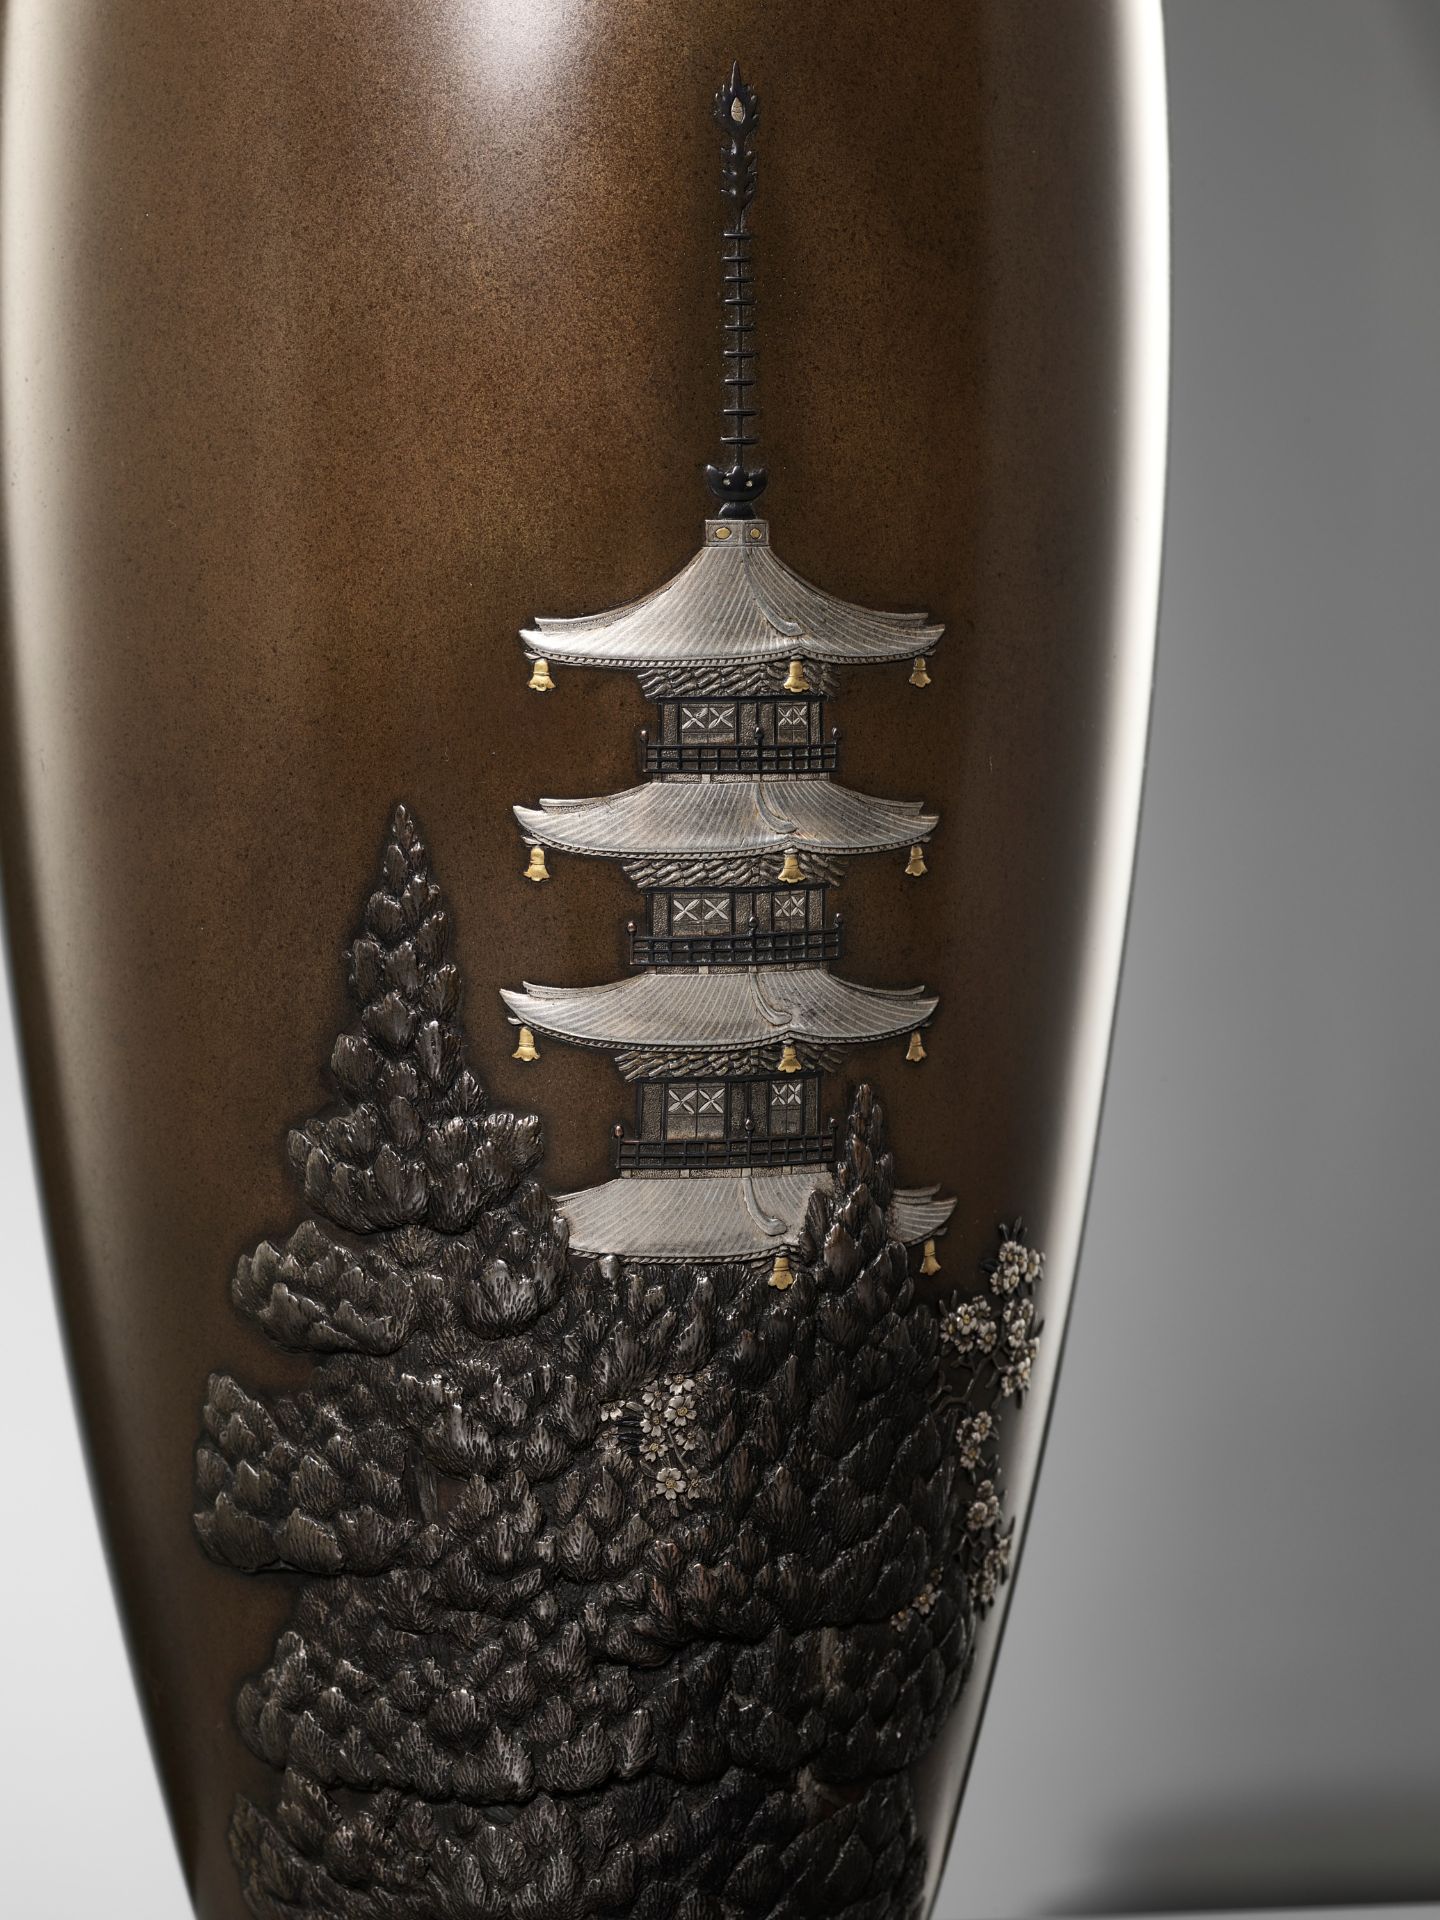 KOITSU FOR THE NOGAWA COMPANY: A LARGE INLAID BRONZE VASE DEPICTING A GOJUNOTO PAGODA IN SPRING - Image 4 of 12